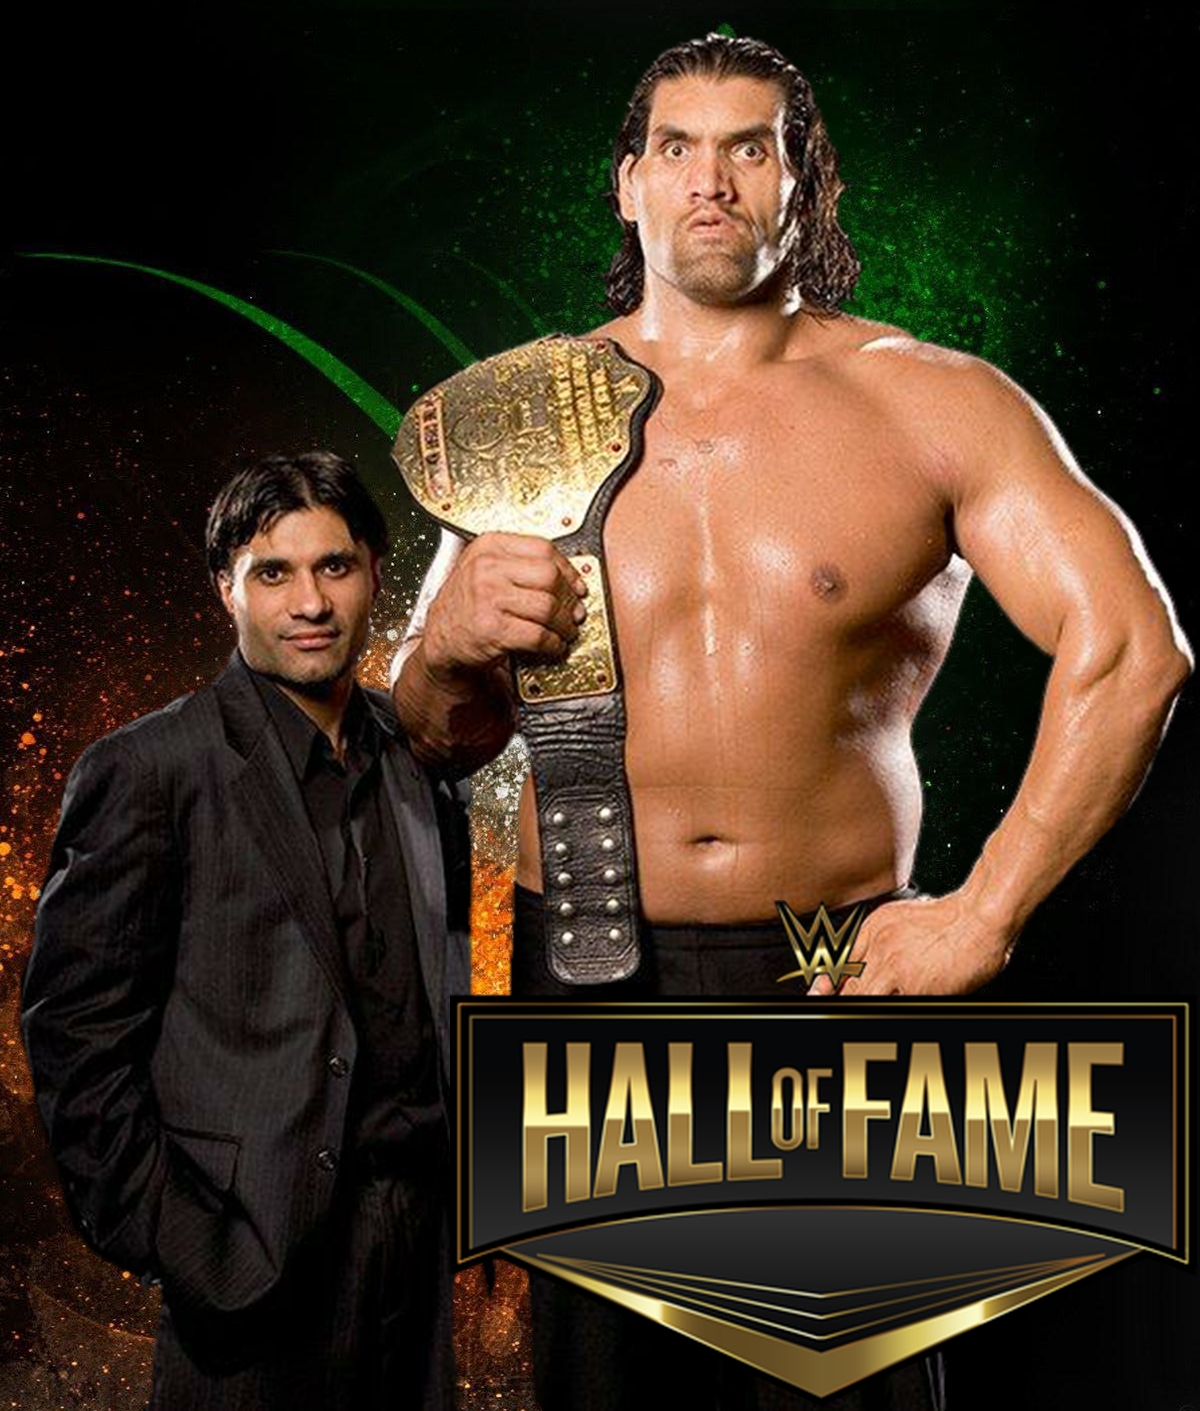 WWE Hall Of Fame 2021 Inductee: The Great Khali